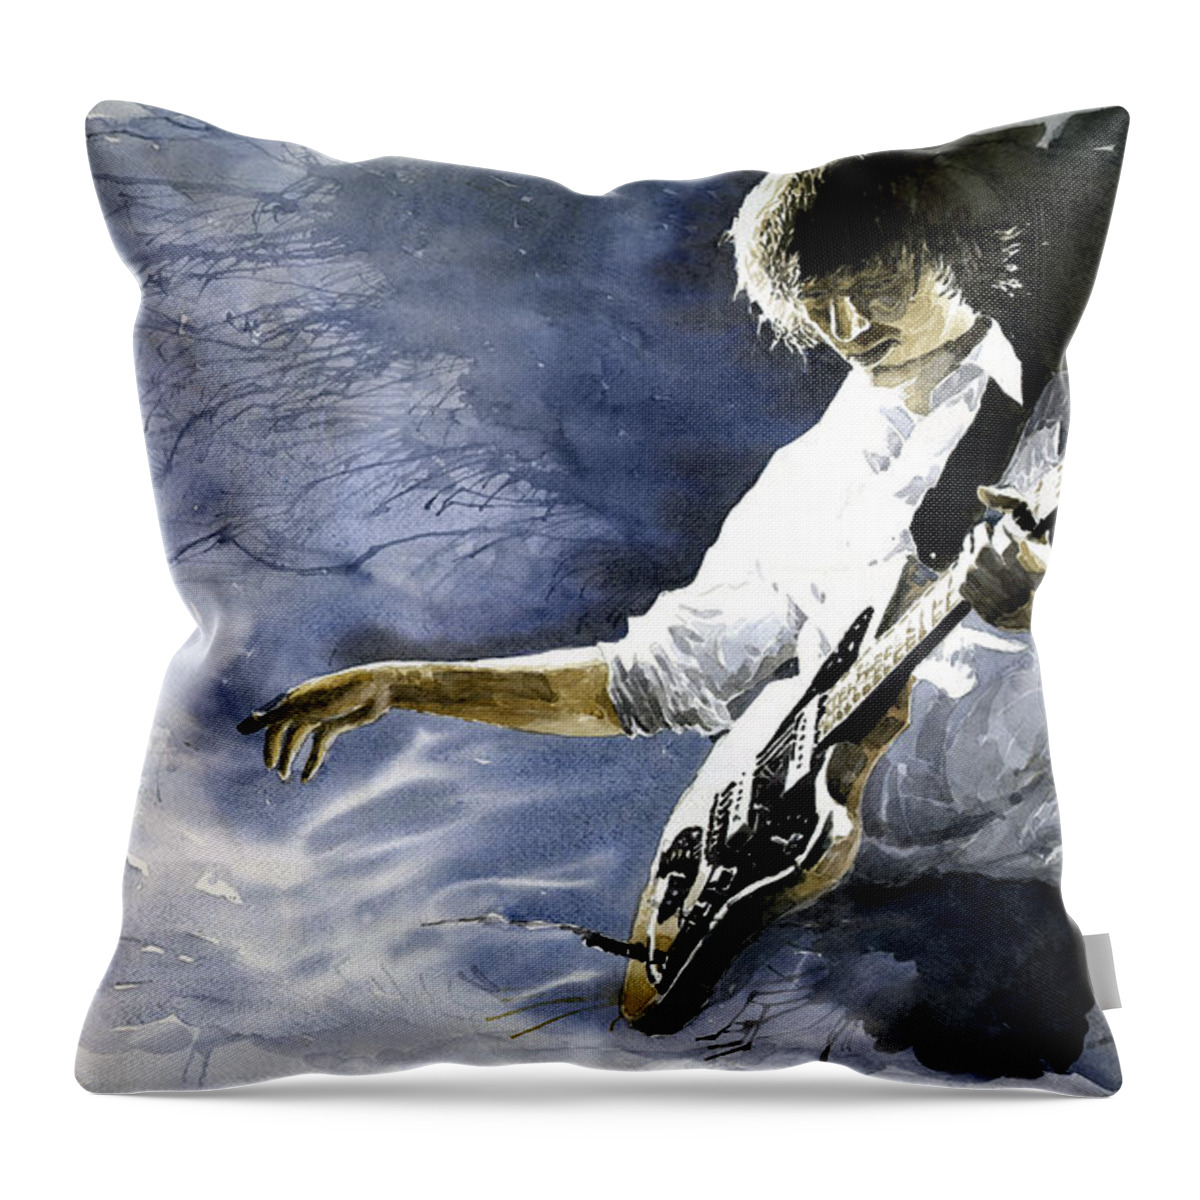 Figurativ Throw Pillow featuring the painting Jazz Guitarist Last Accord by Yuriy Shevchuk